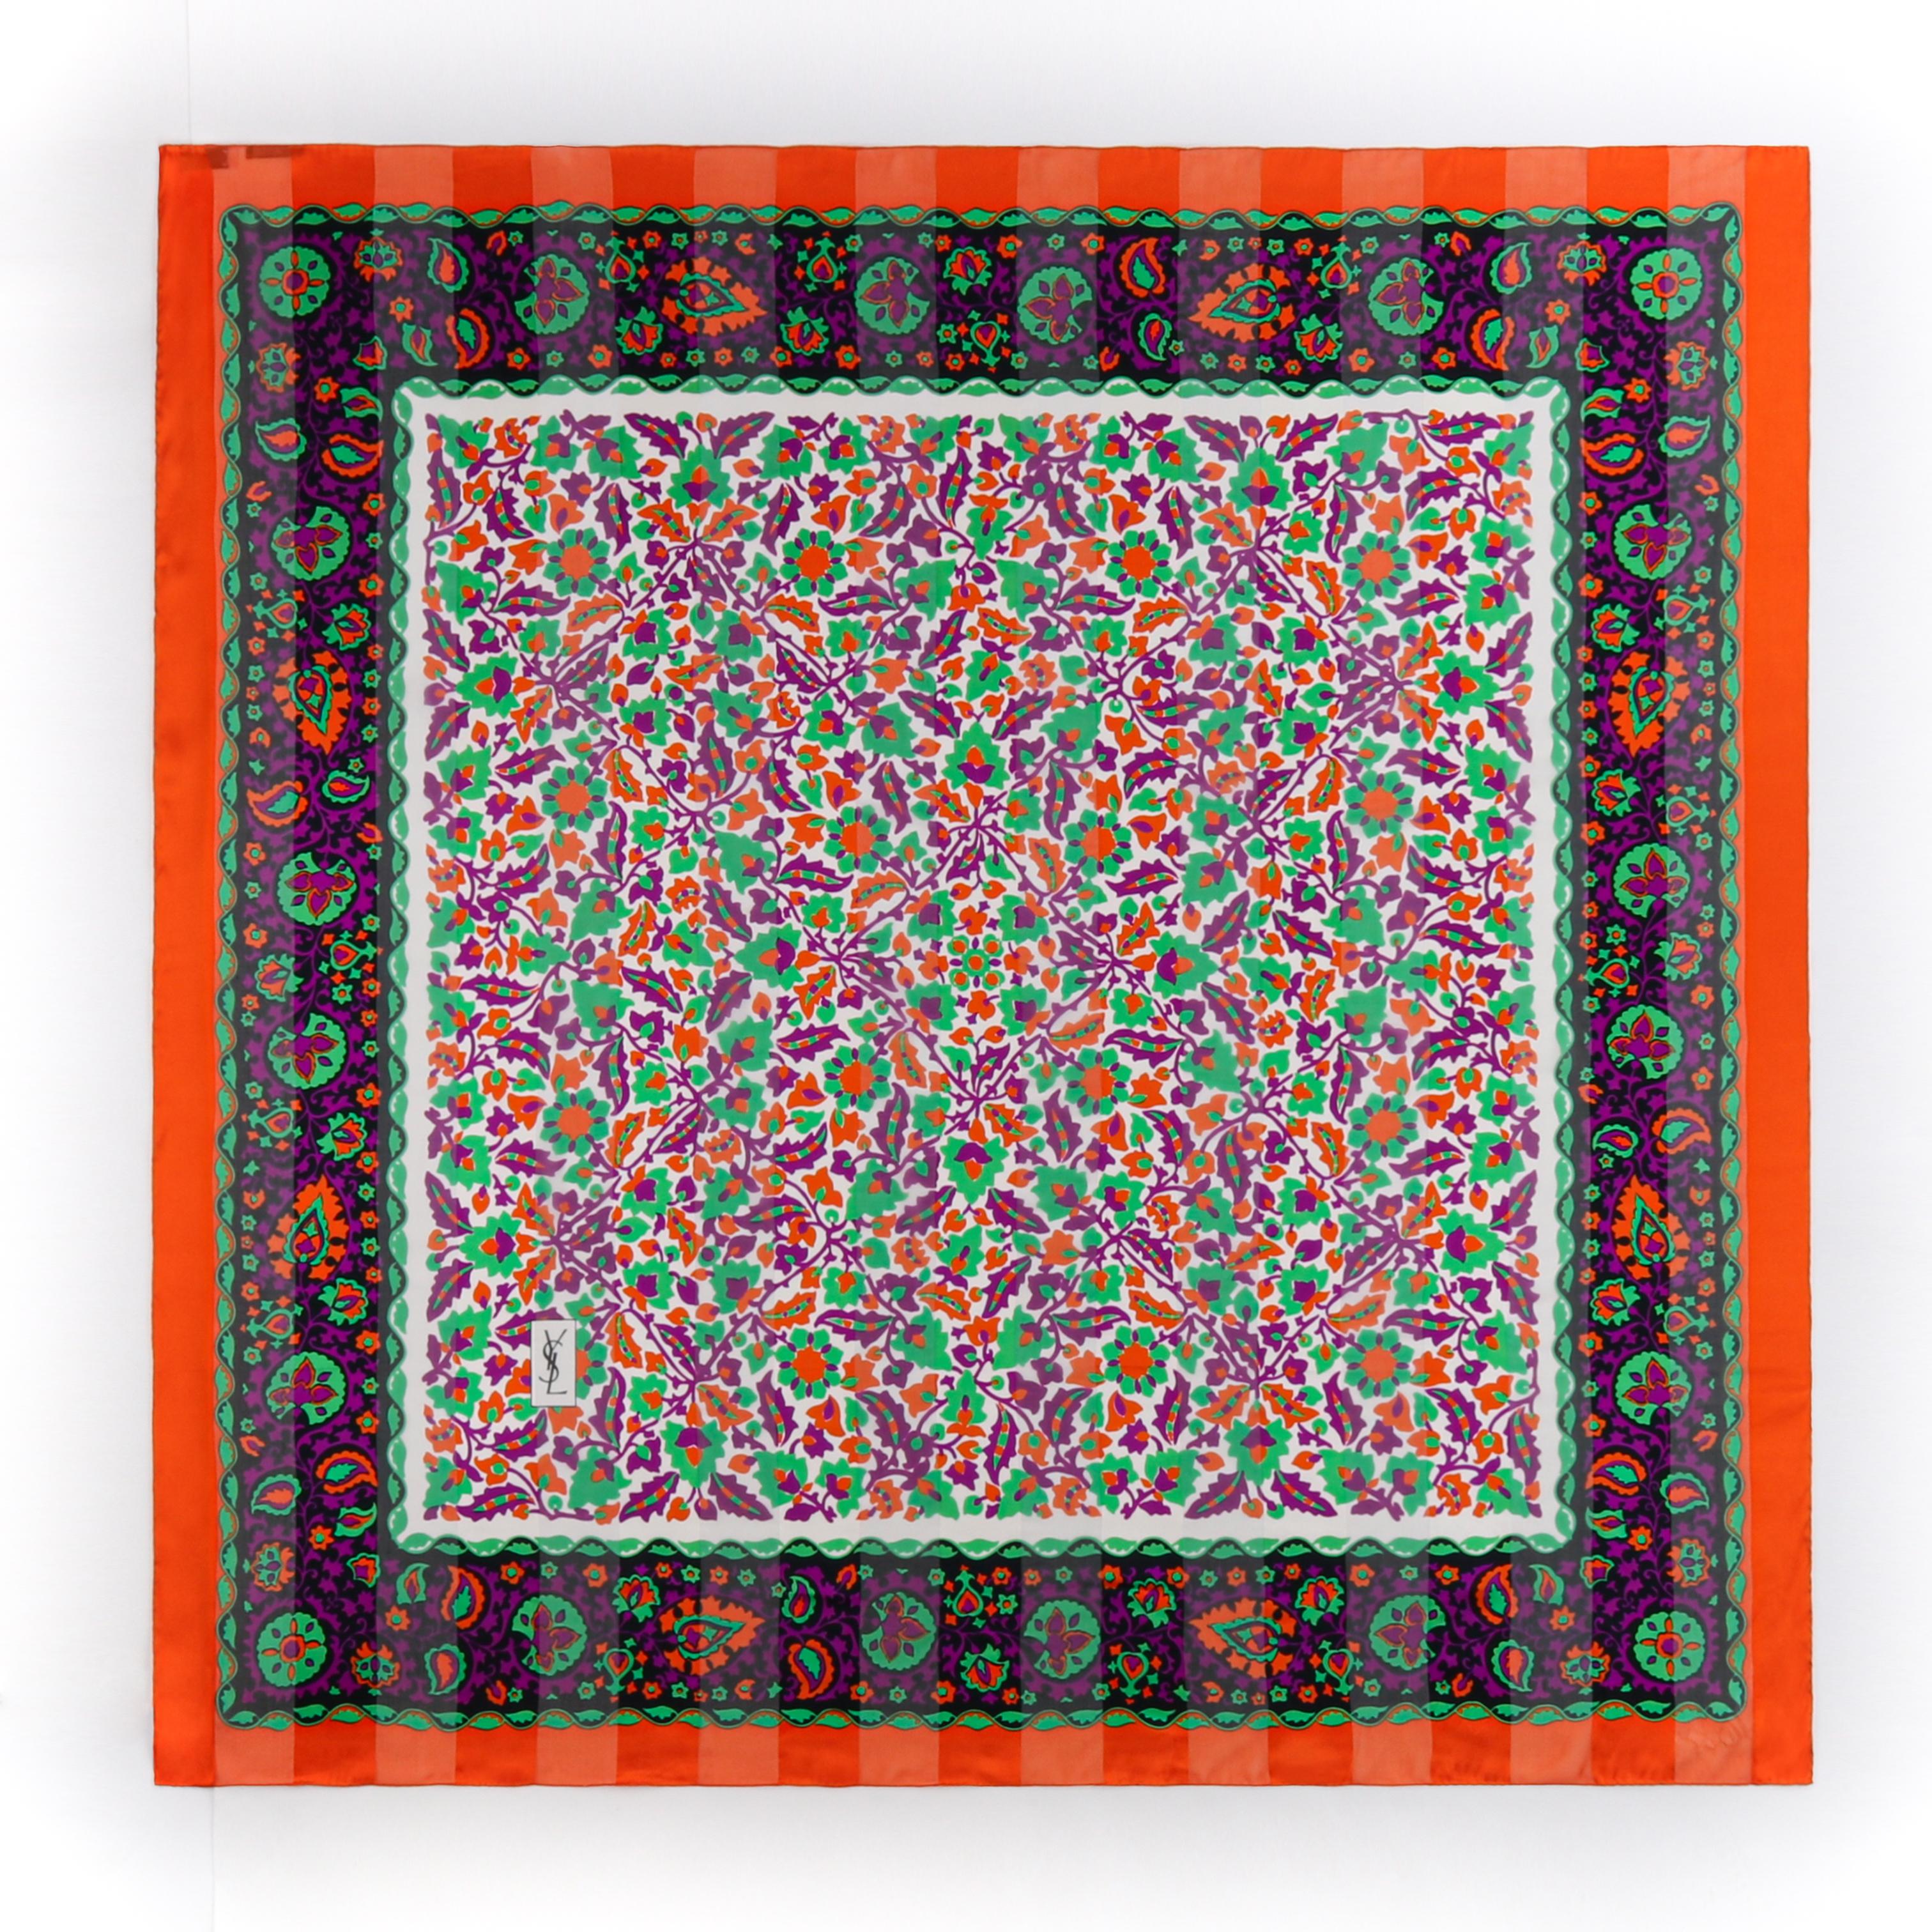 YVES SAINT LAURENT c.1980s Floral Paisley Frame Striped Silk Square Scarf
 
Circa: 1980’s
Brand / Manufacturer: Yves Saint Laurent
Designer: Yves Saint Laurent
Style: Square scarf
Color(s): Orange, green, purple, black, white
Marked Fabric Content: